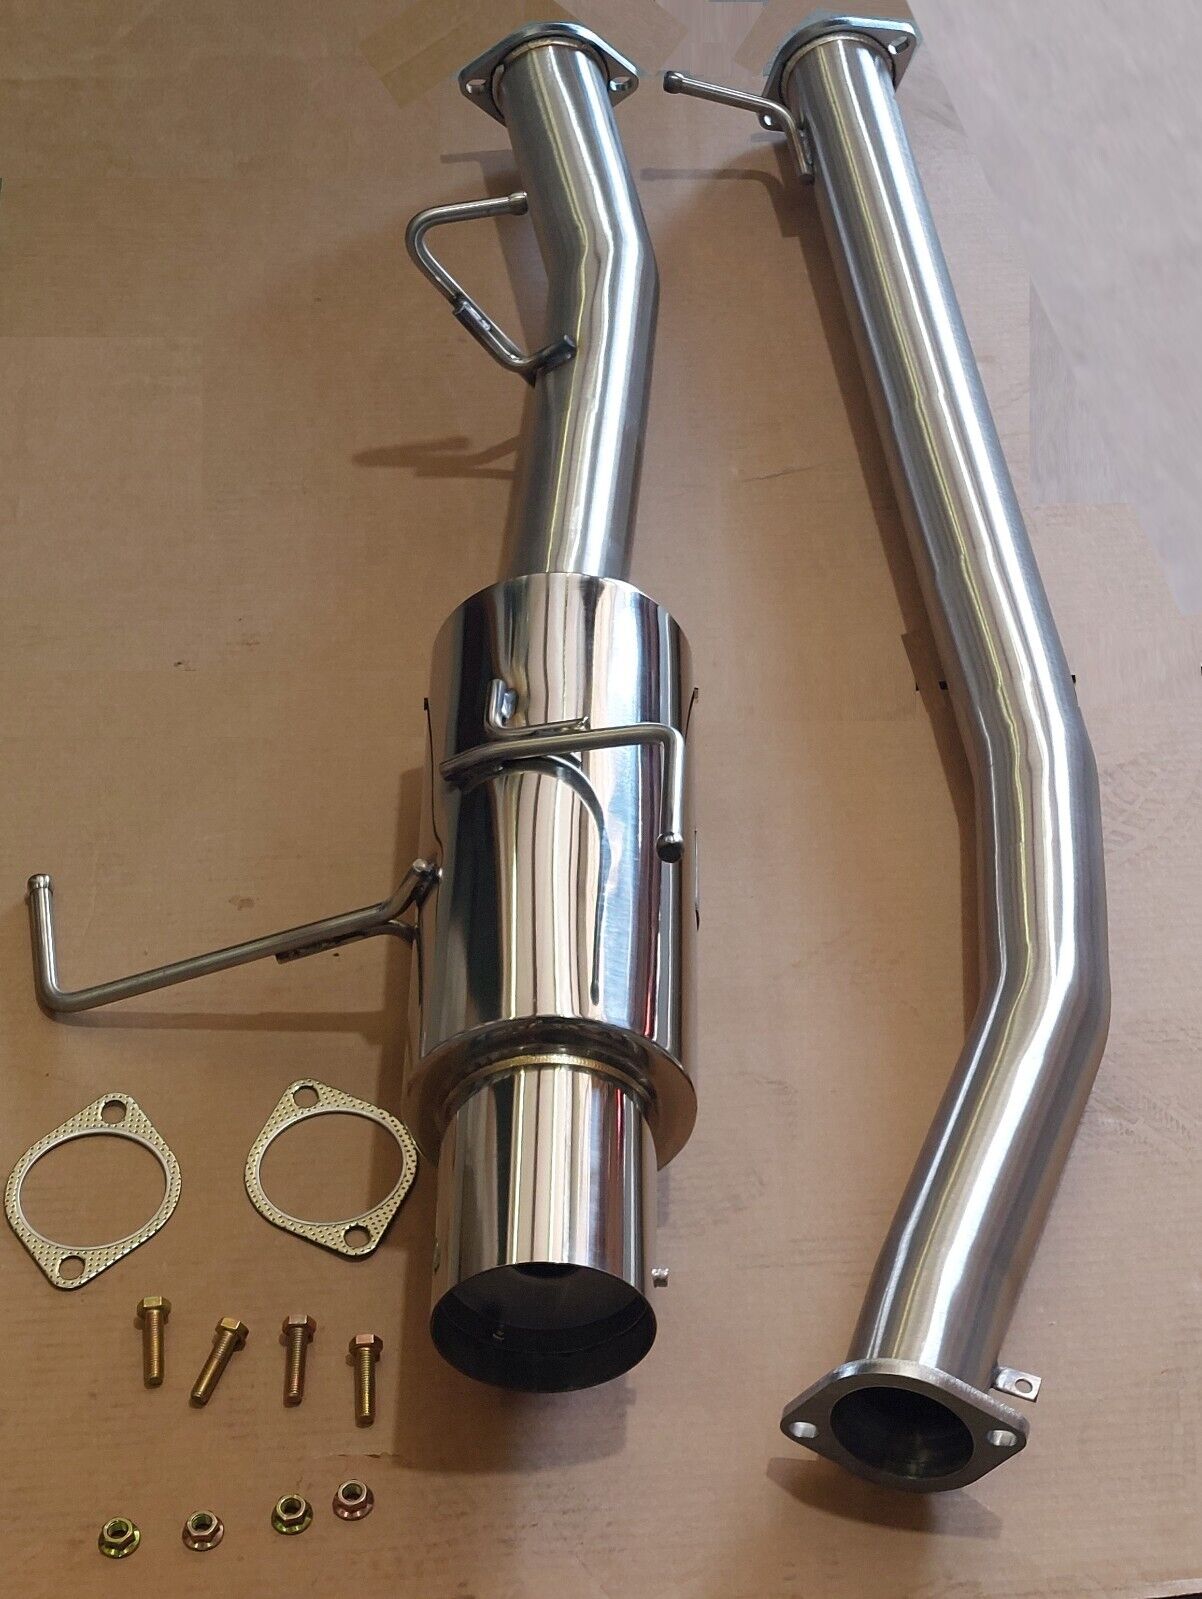 SALE ISR Performance GT Single Exhaust w/ Gaskets FOR Silvia S14 240SX 95-98